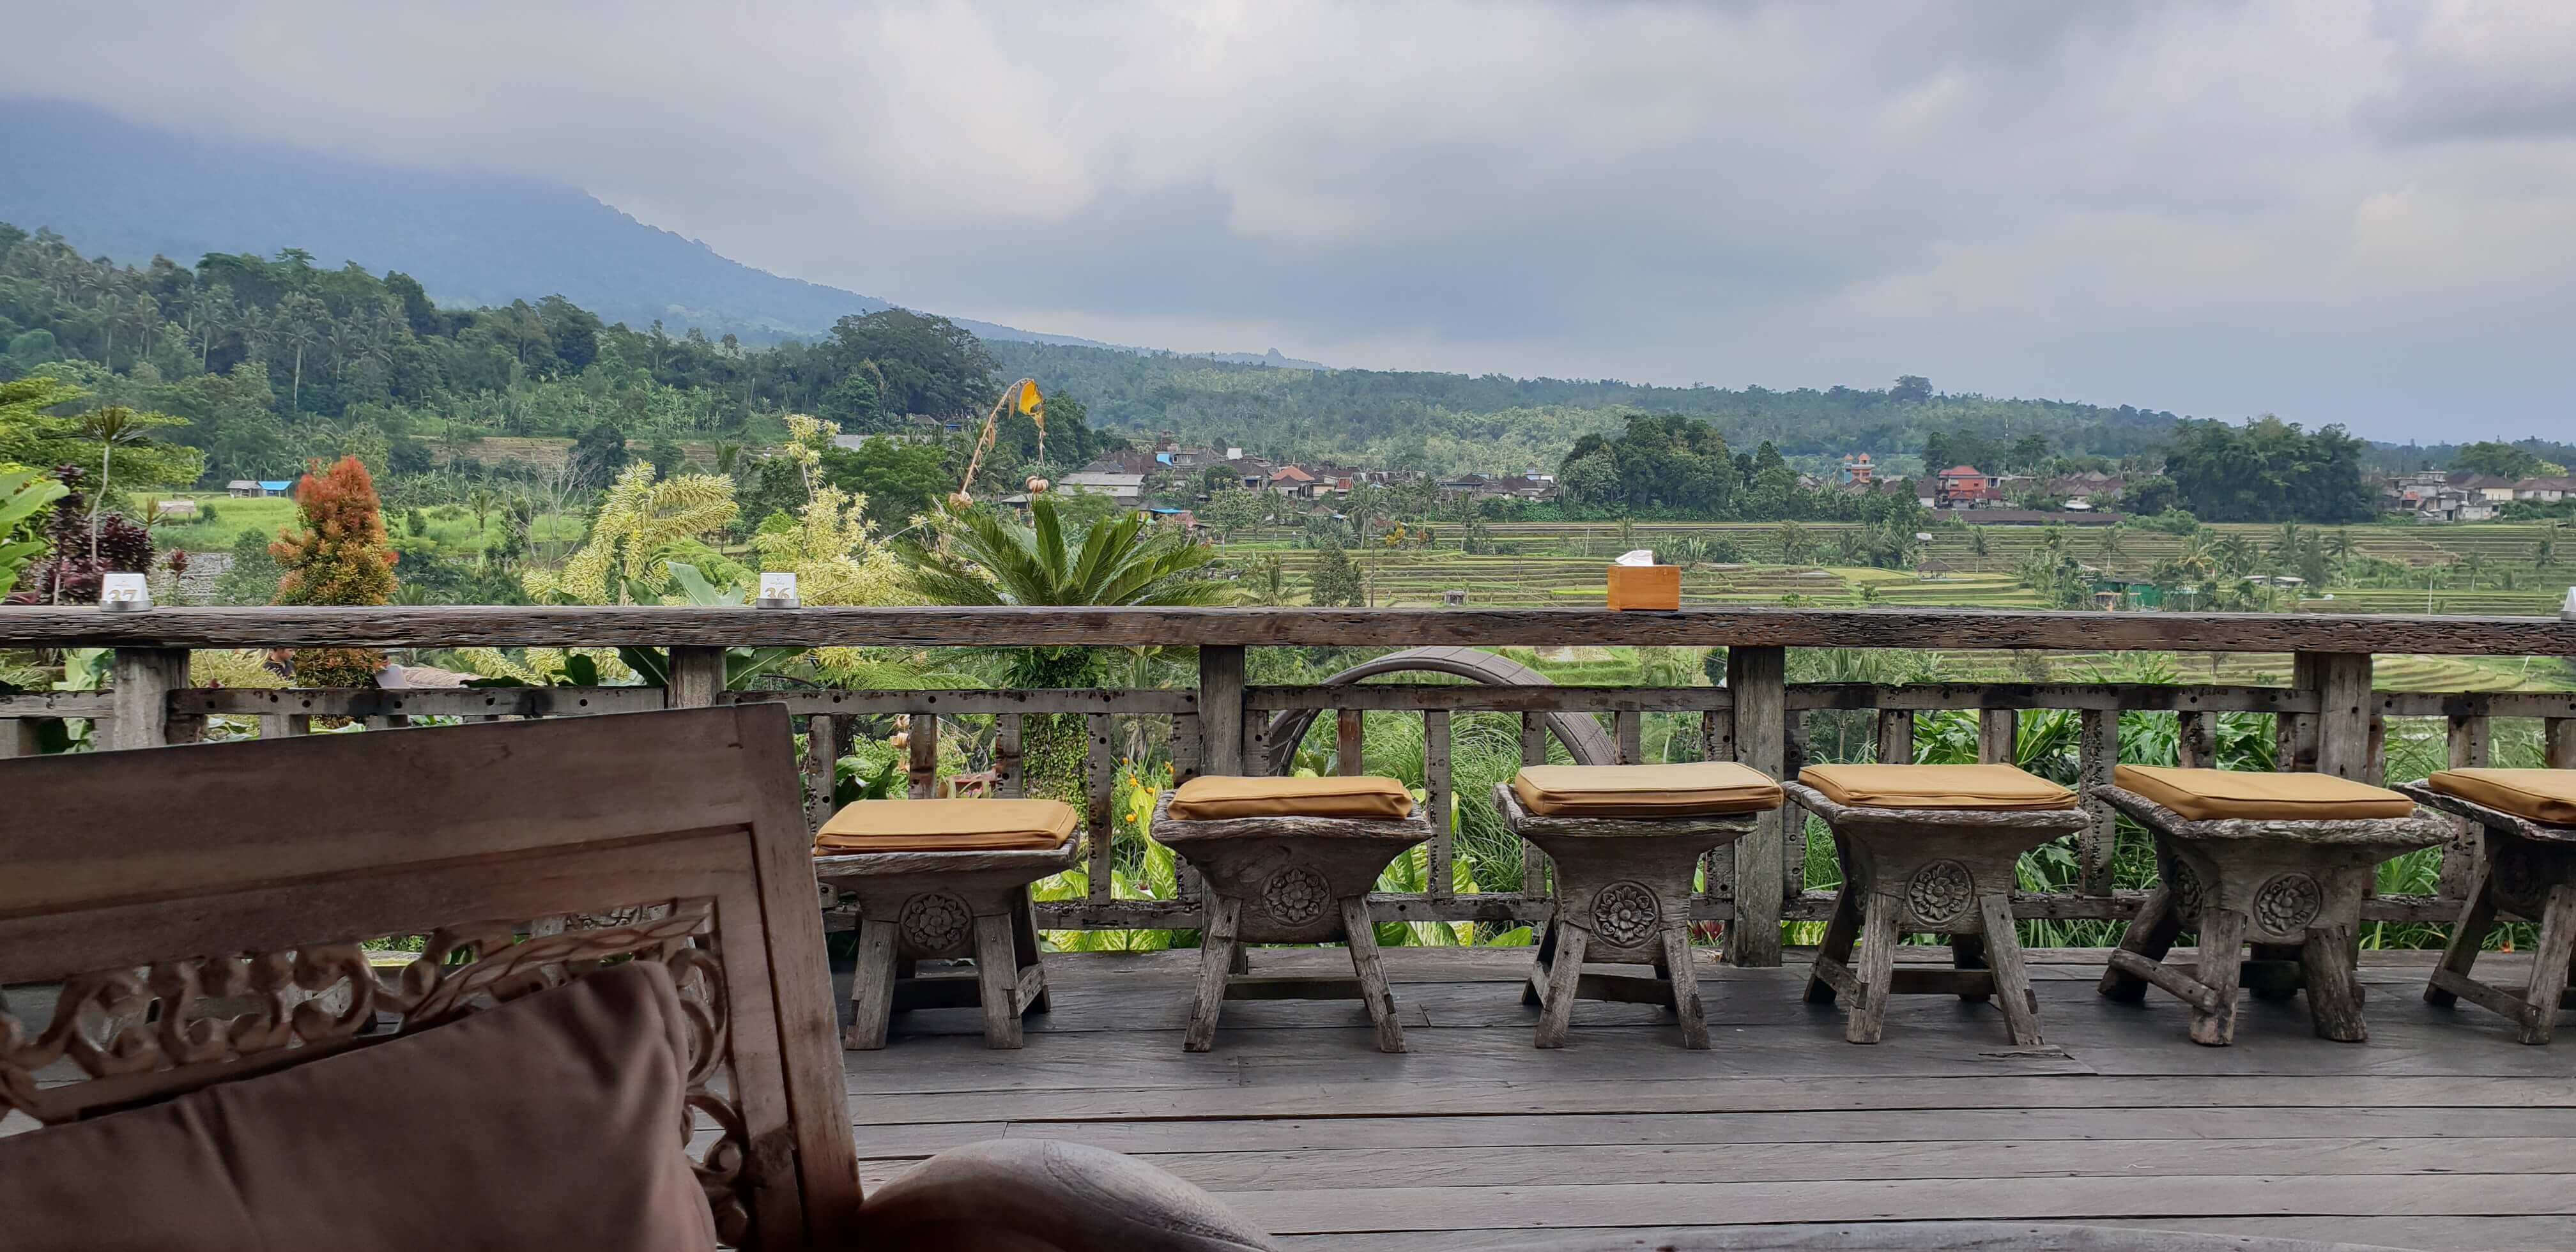 Gong Jatiluwih is the best place to enjoy a good meal with a scenic view. In my entire 10 day Bali stay, I had one of the best culinary experiences here.